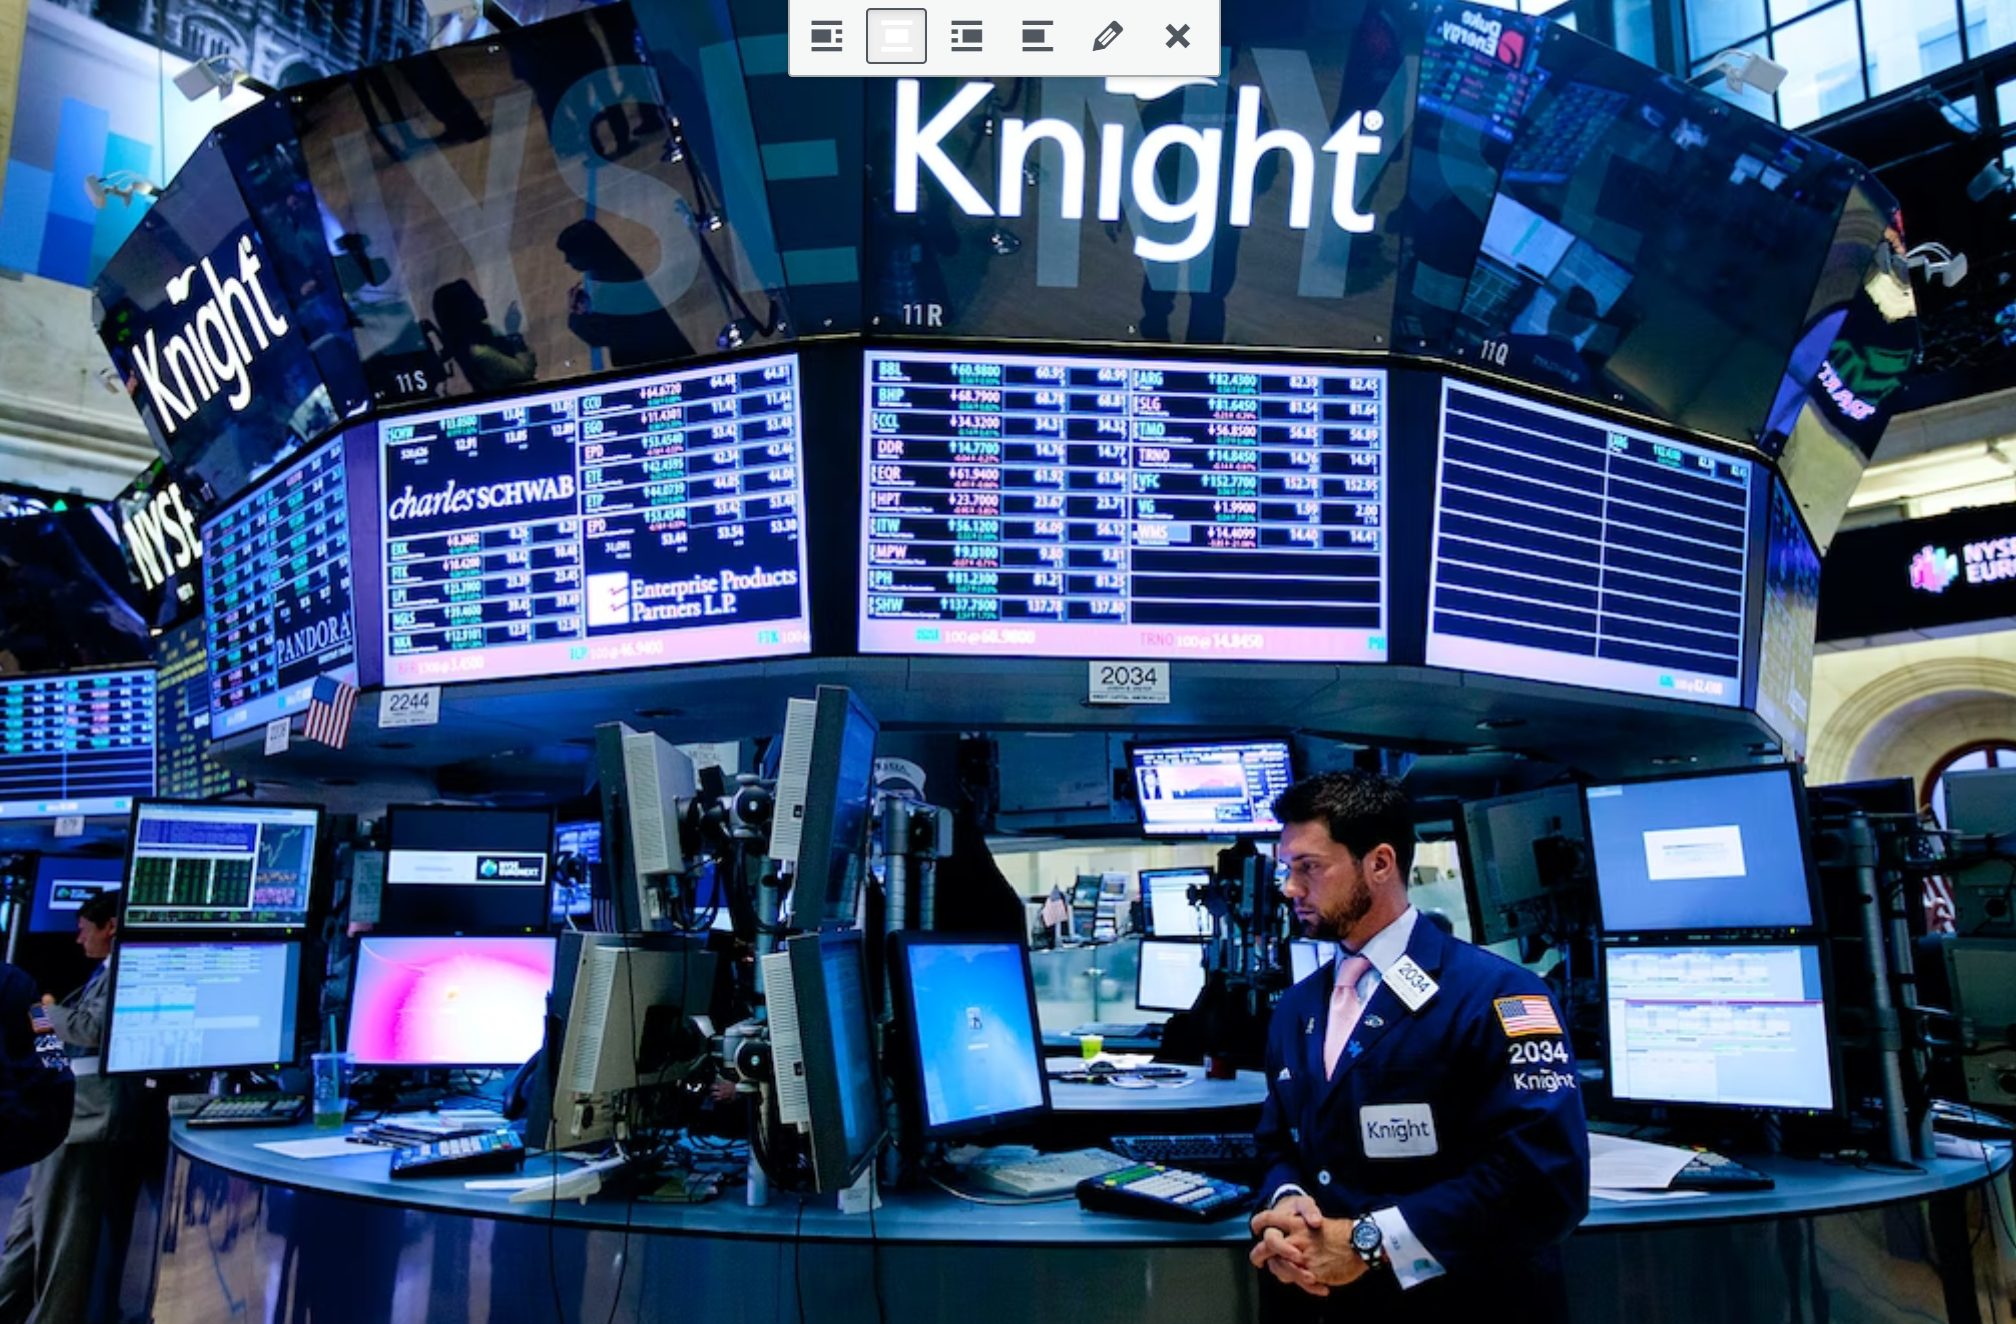 WHISTLEBLOWER VINDICATED: MASSIVE TRADING FIRM KNIGHT CAPITAL CHARGED WITH ABUSING “NAKED SHORTS”